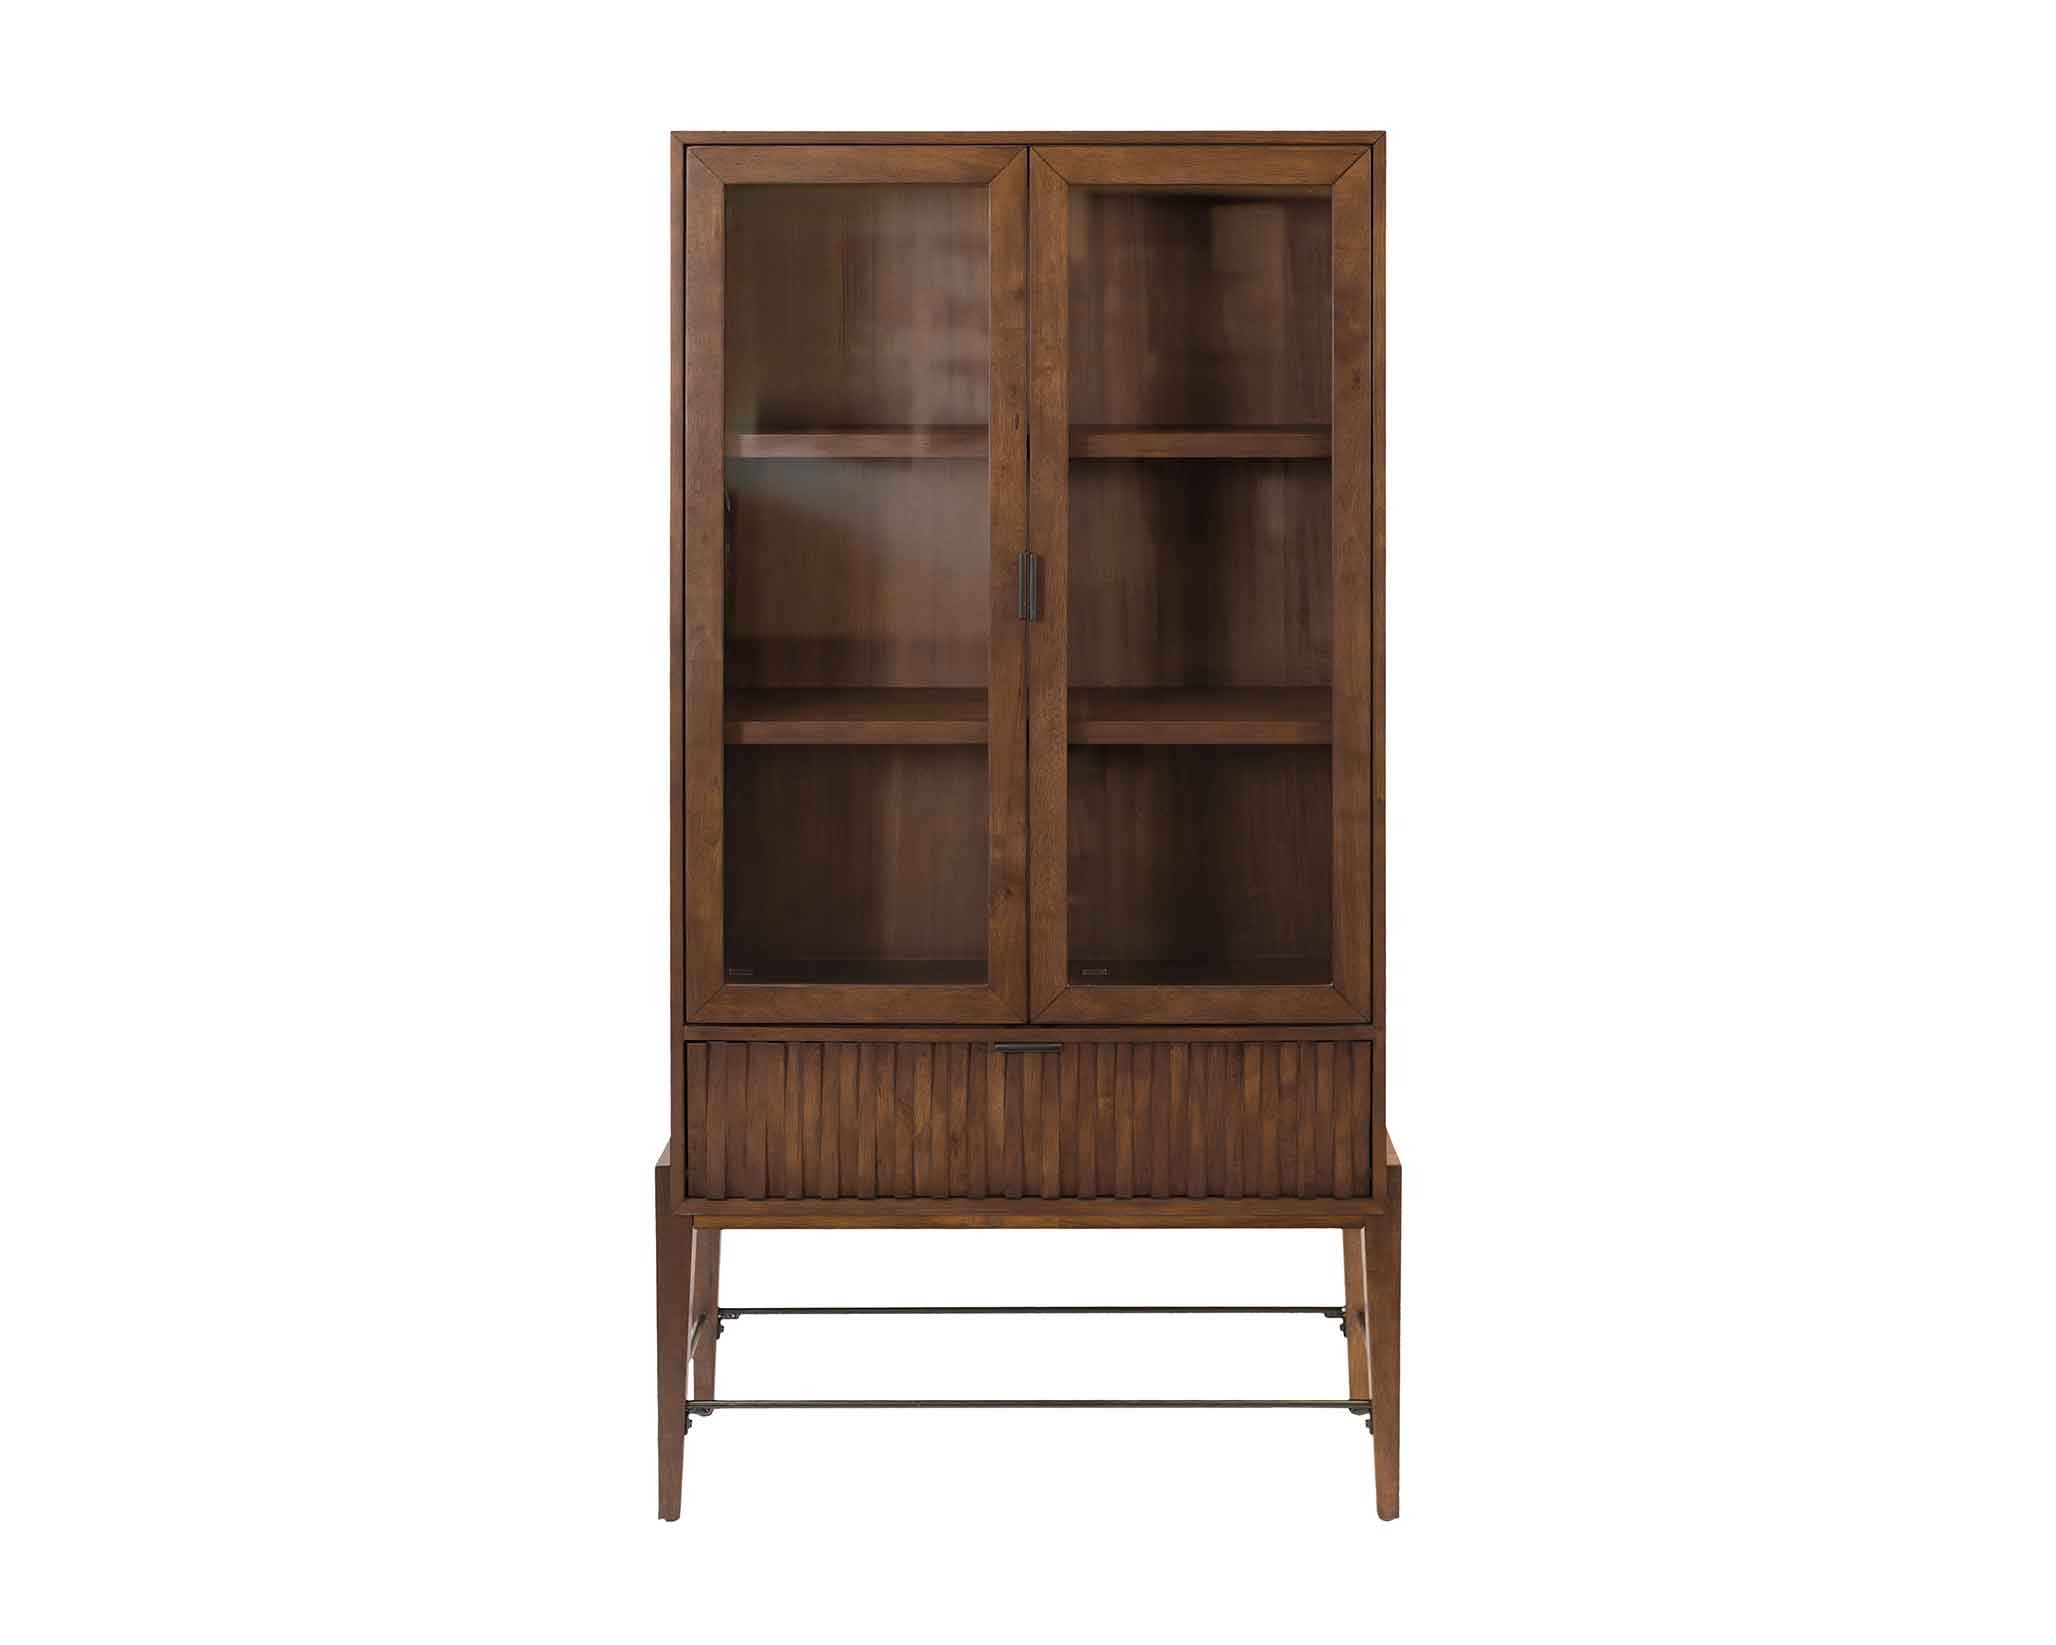 Delray Glass Door Bookcase/Display Cabinet by Martin Furniture